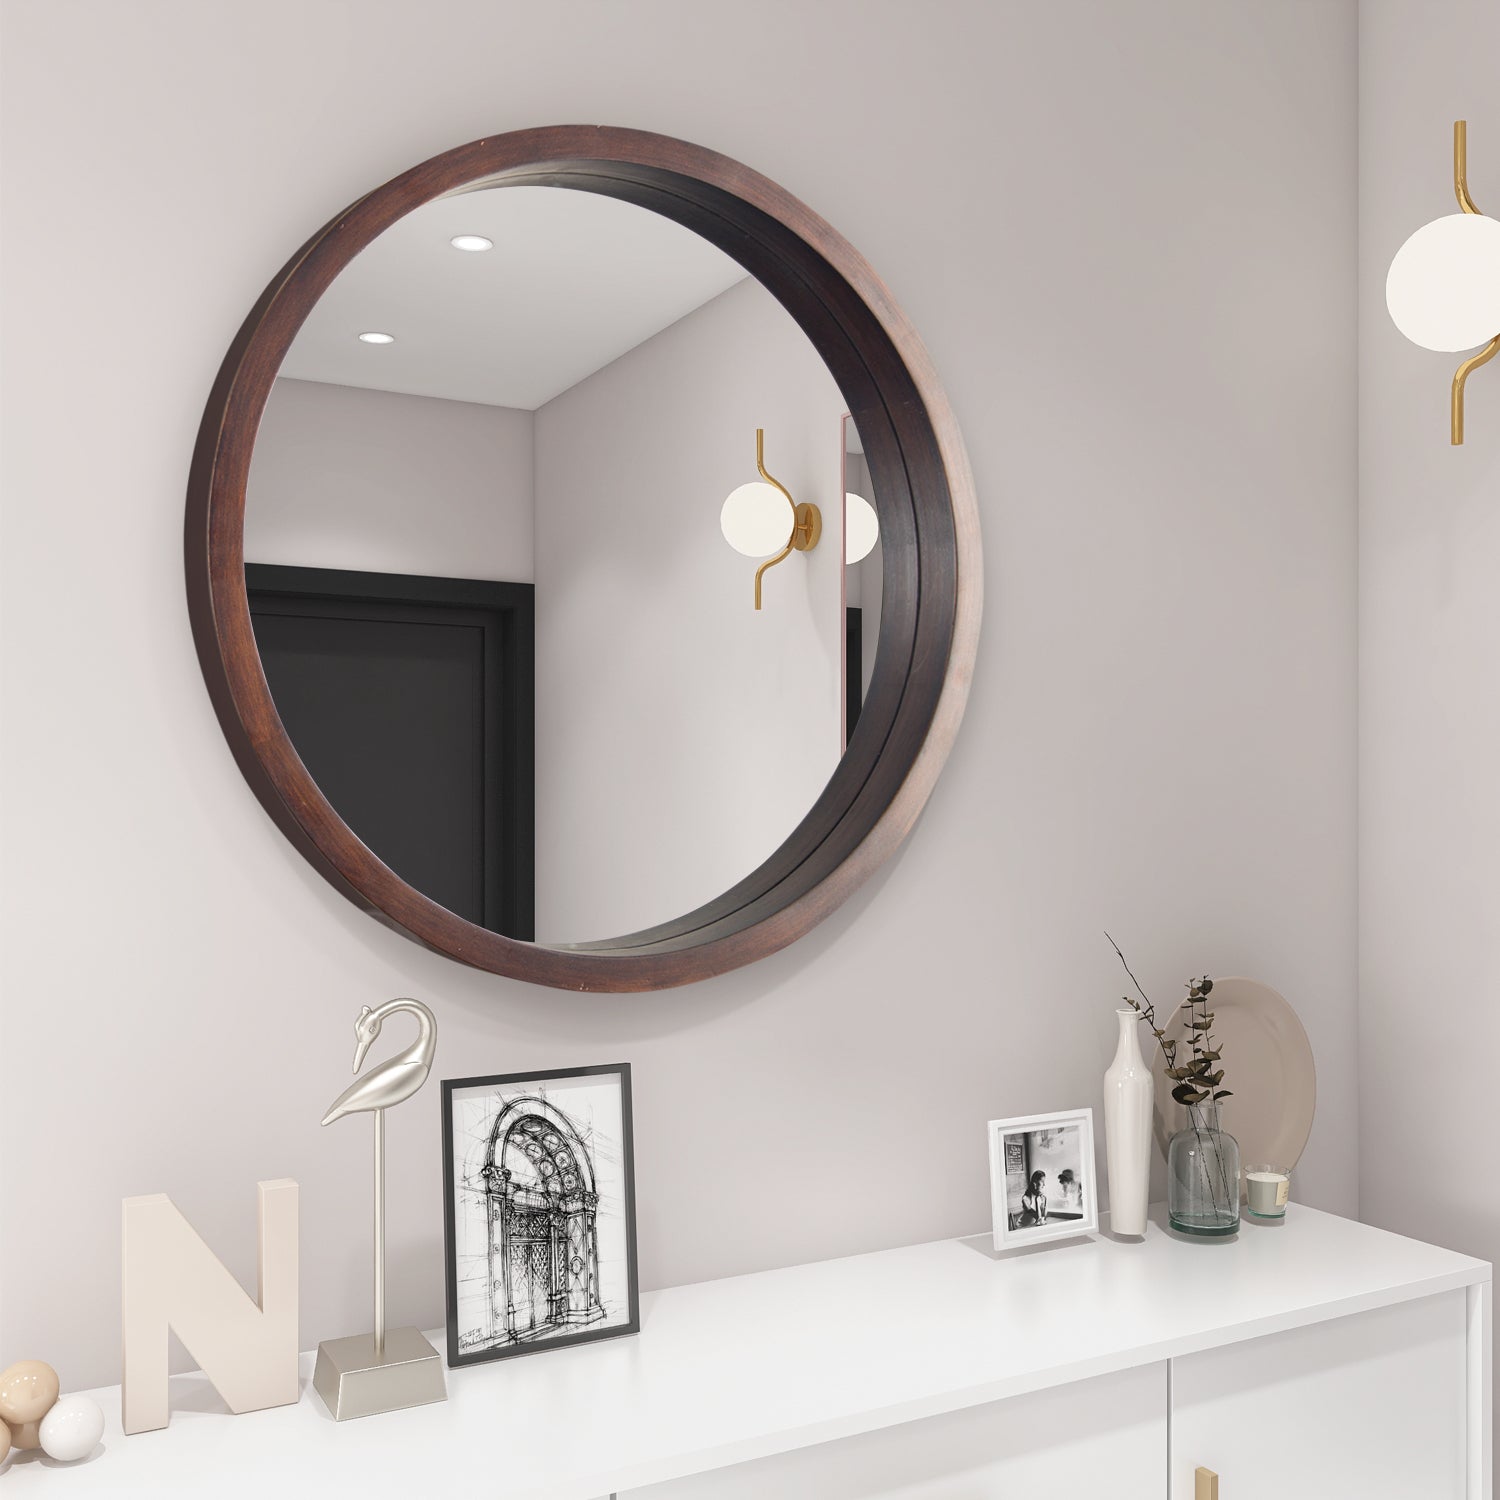 24" Circle Mirror with Wood Frame